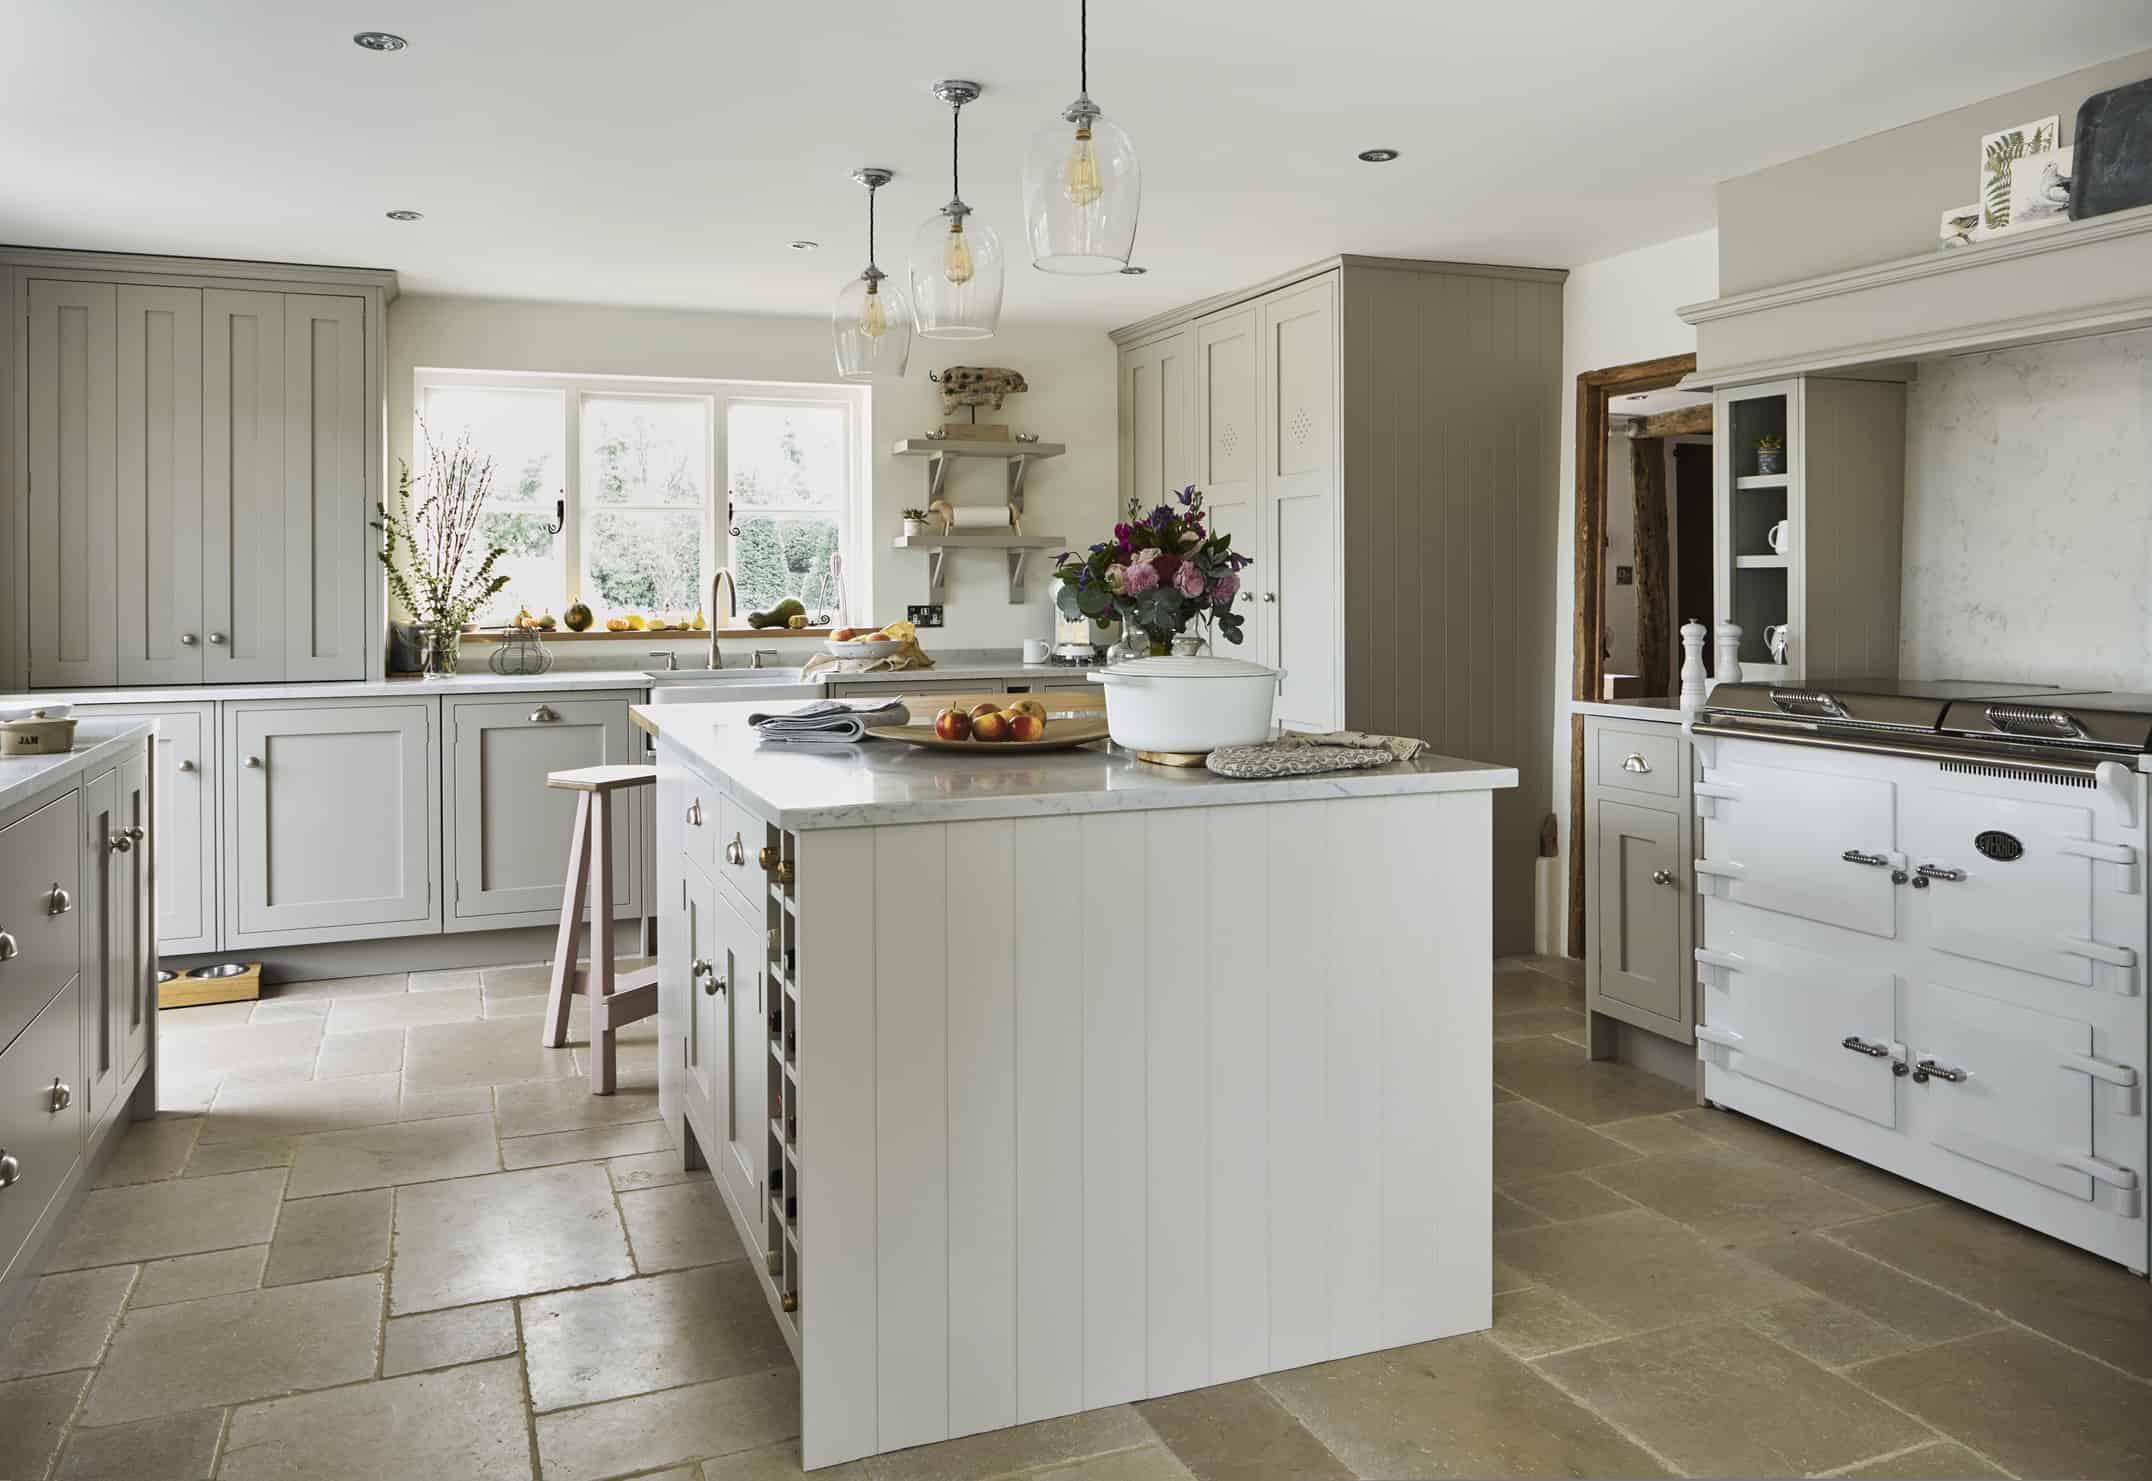 John Lewis of Hungerford shaker kitchen with white kitchen island and stone flooring and marble worktop